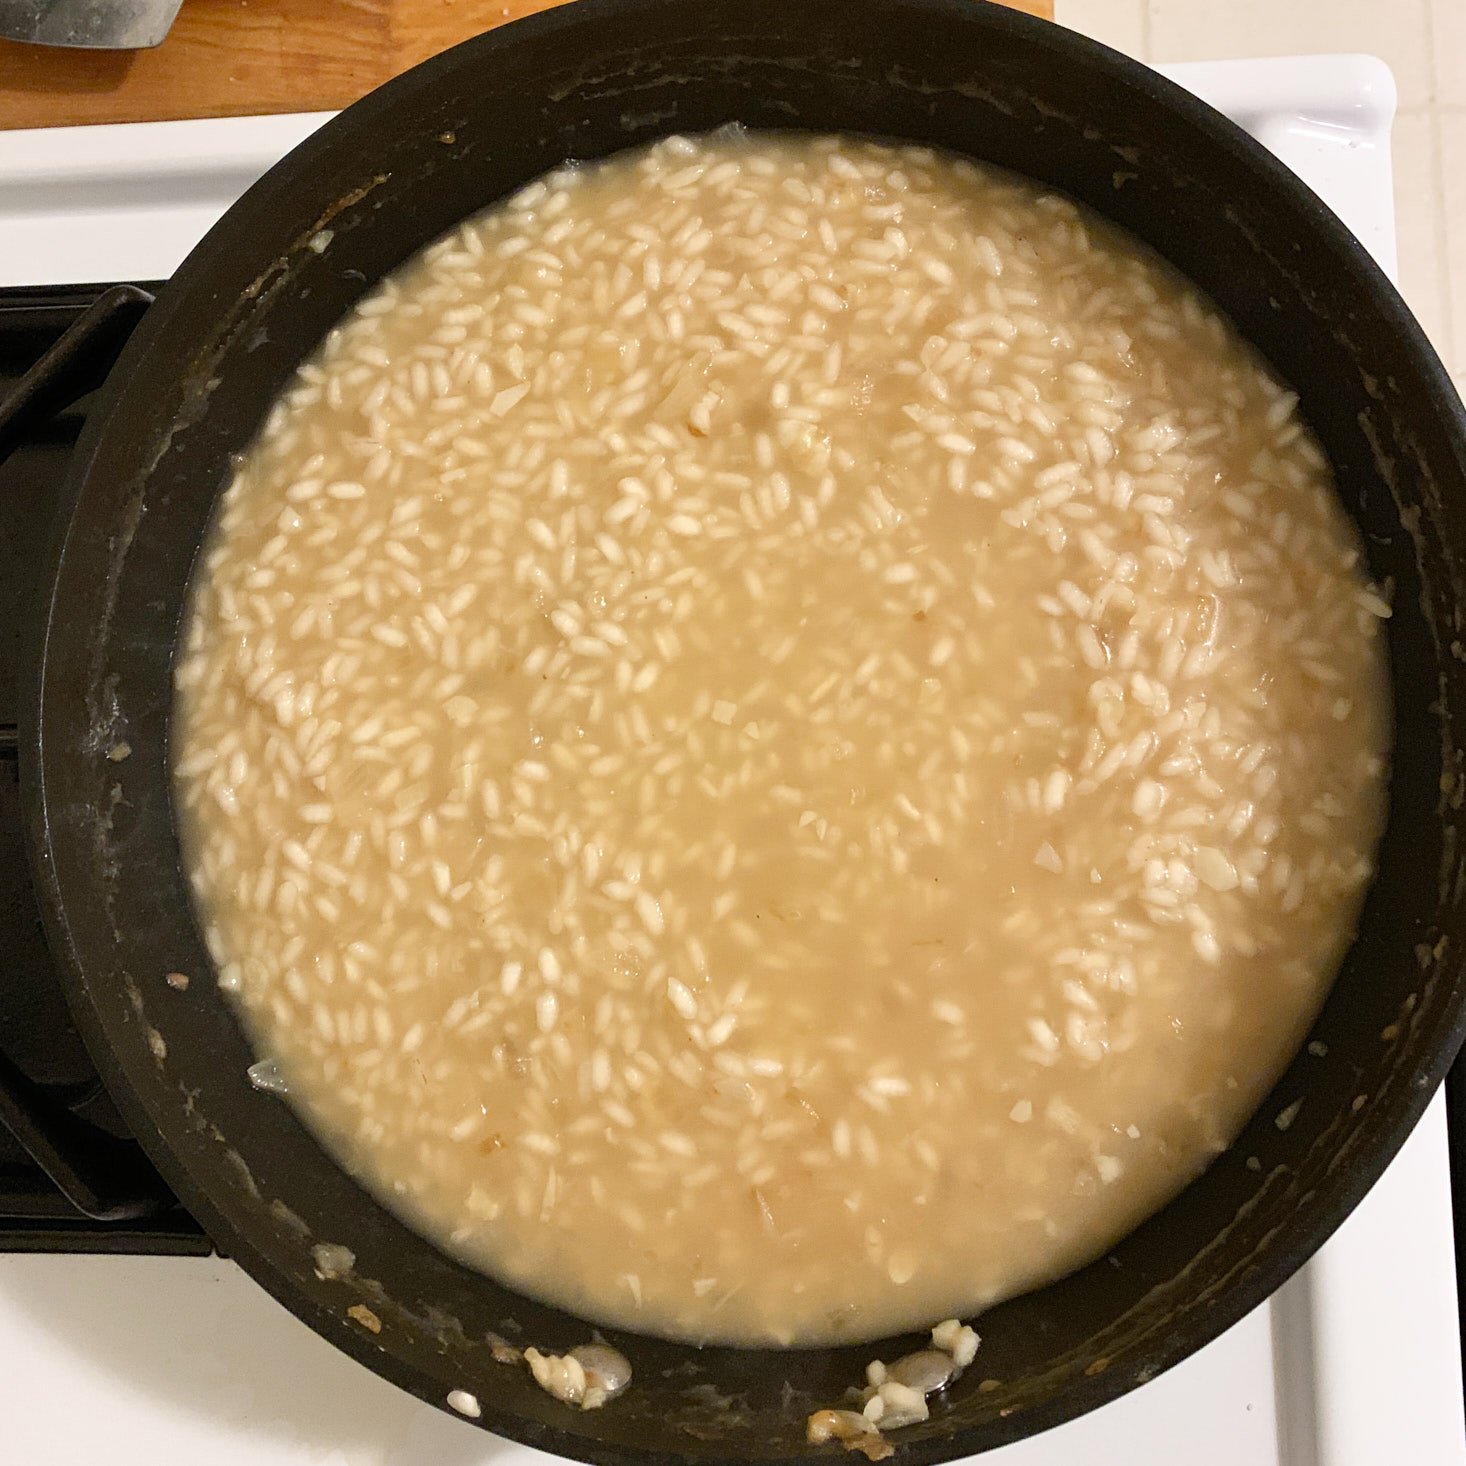 water and stock added to risotto in pan